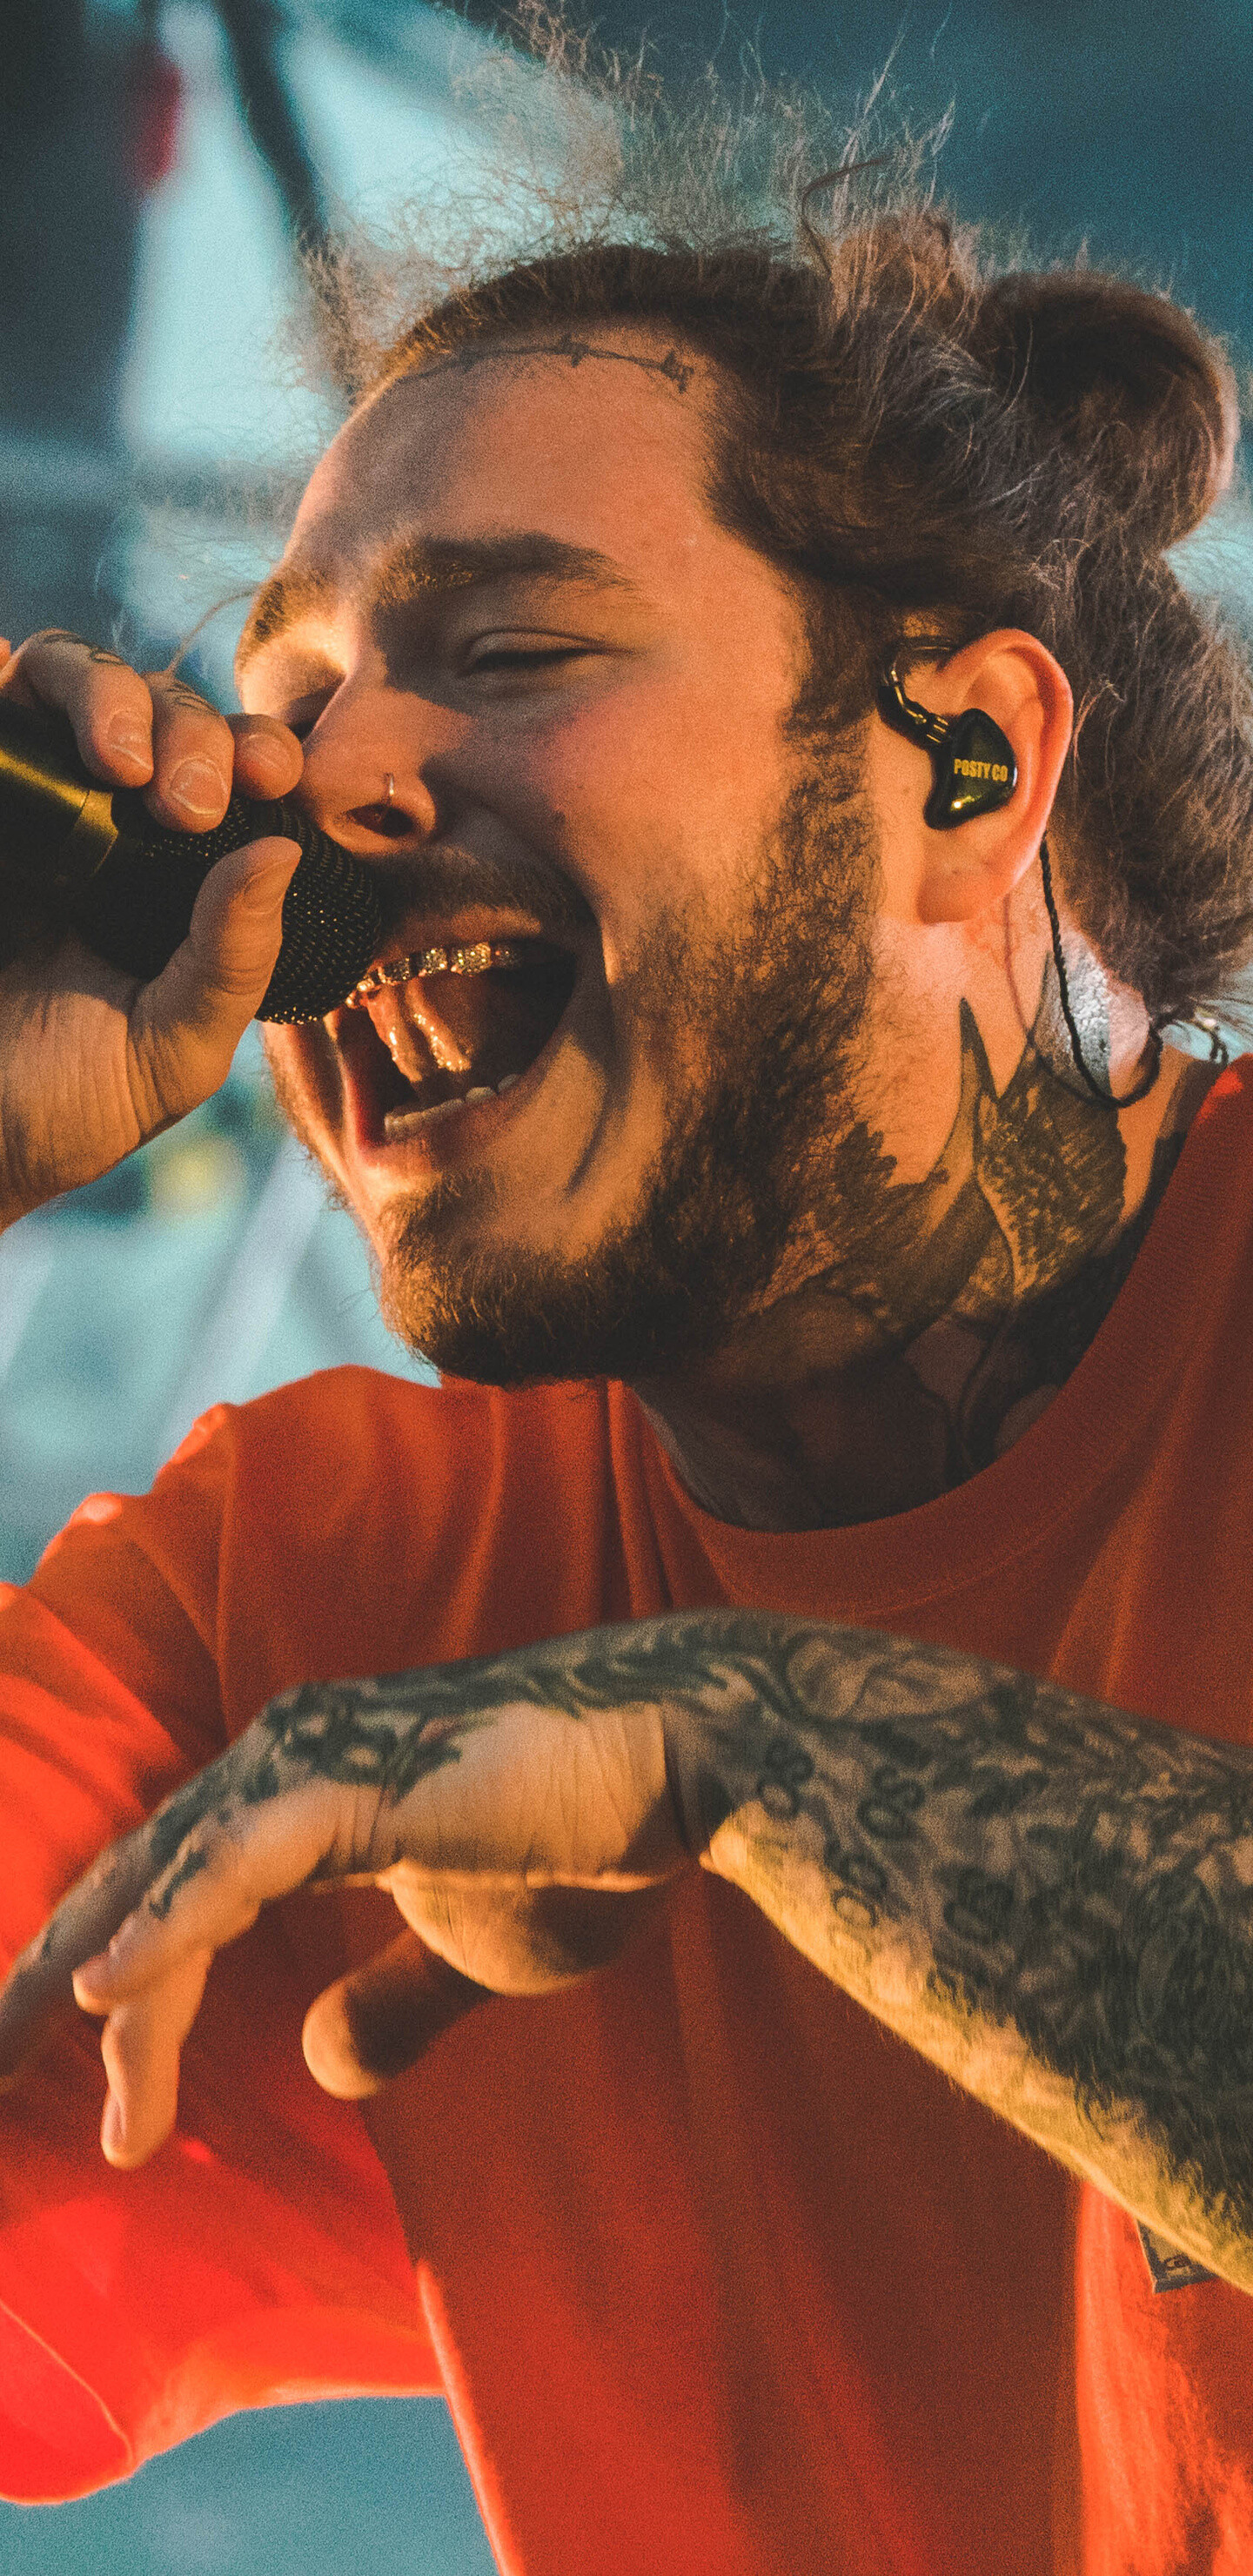 Post Malone: His second album, Beerbongs & Bentleys (2018), debuted at number one on the US Billboard 200. 1440x2960 HD Background.